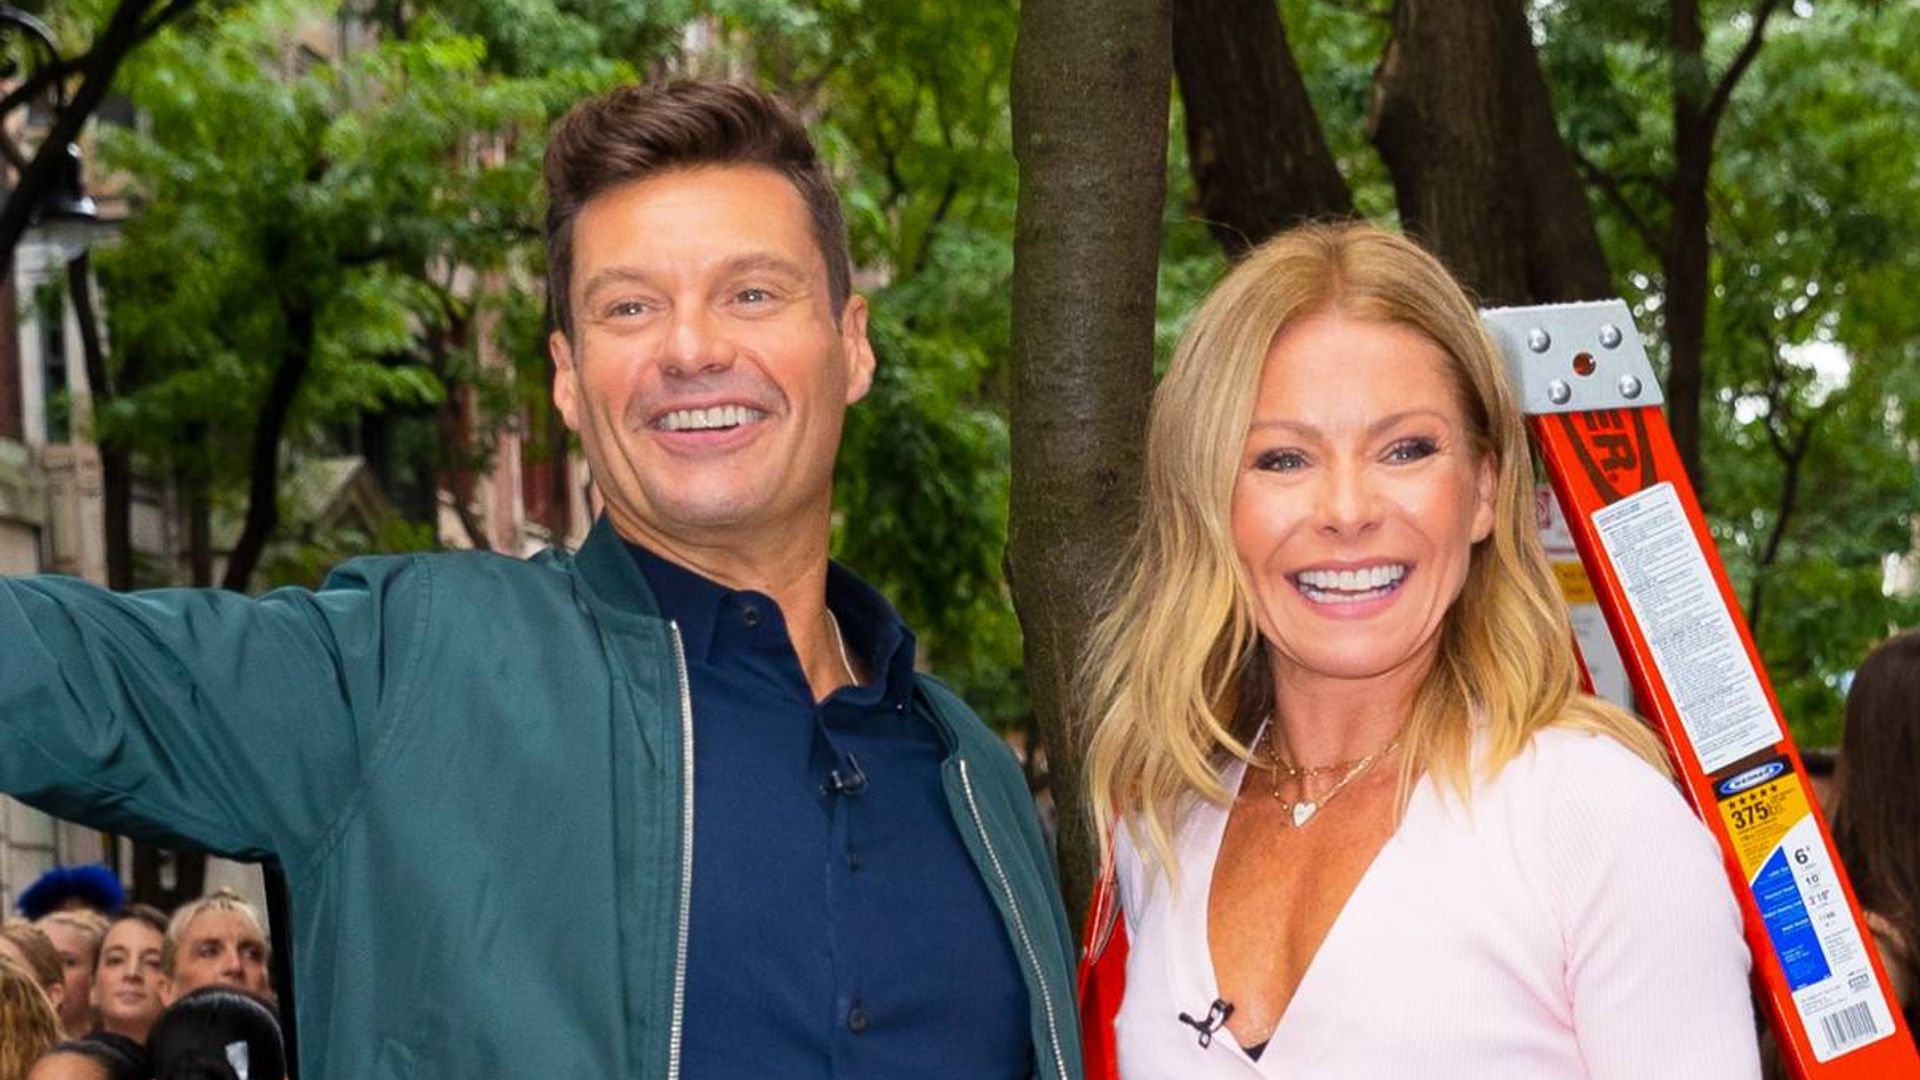 Kelly Ripa: Behind-the-Scenes 'Live!' Drama in 'Live Wire